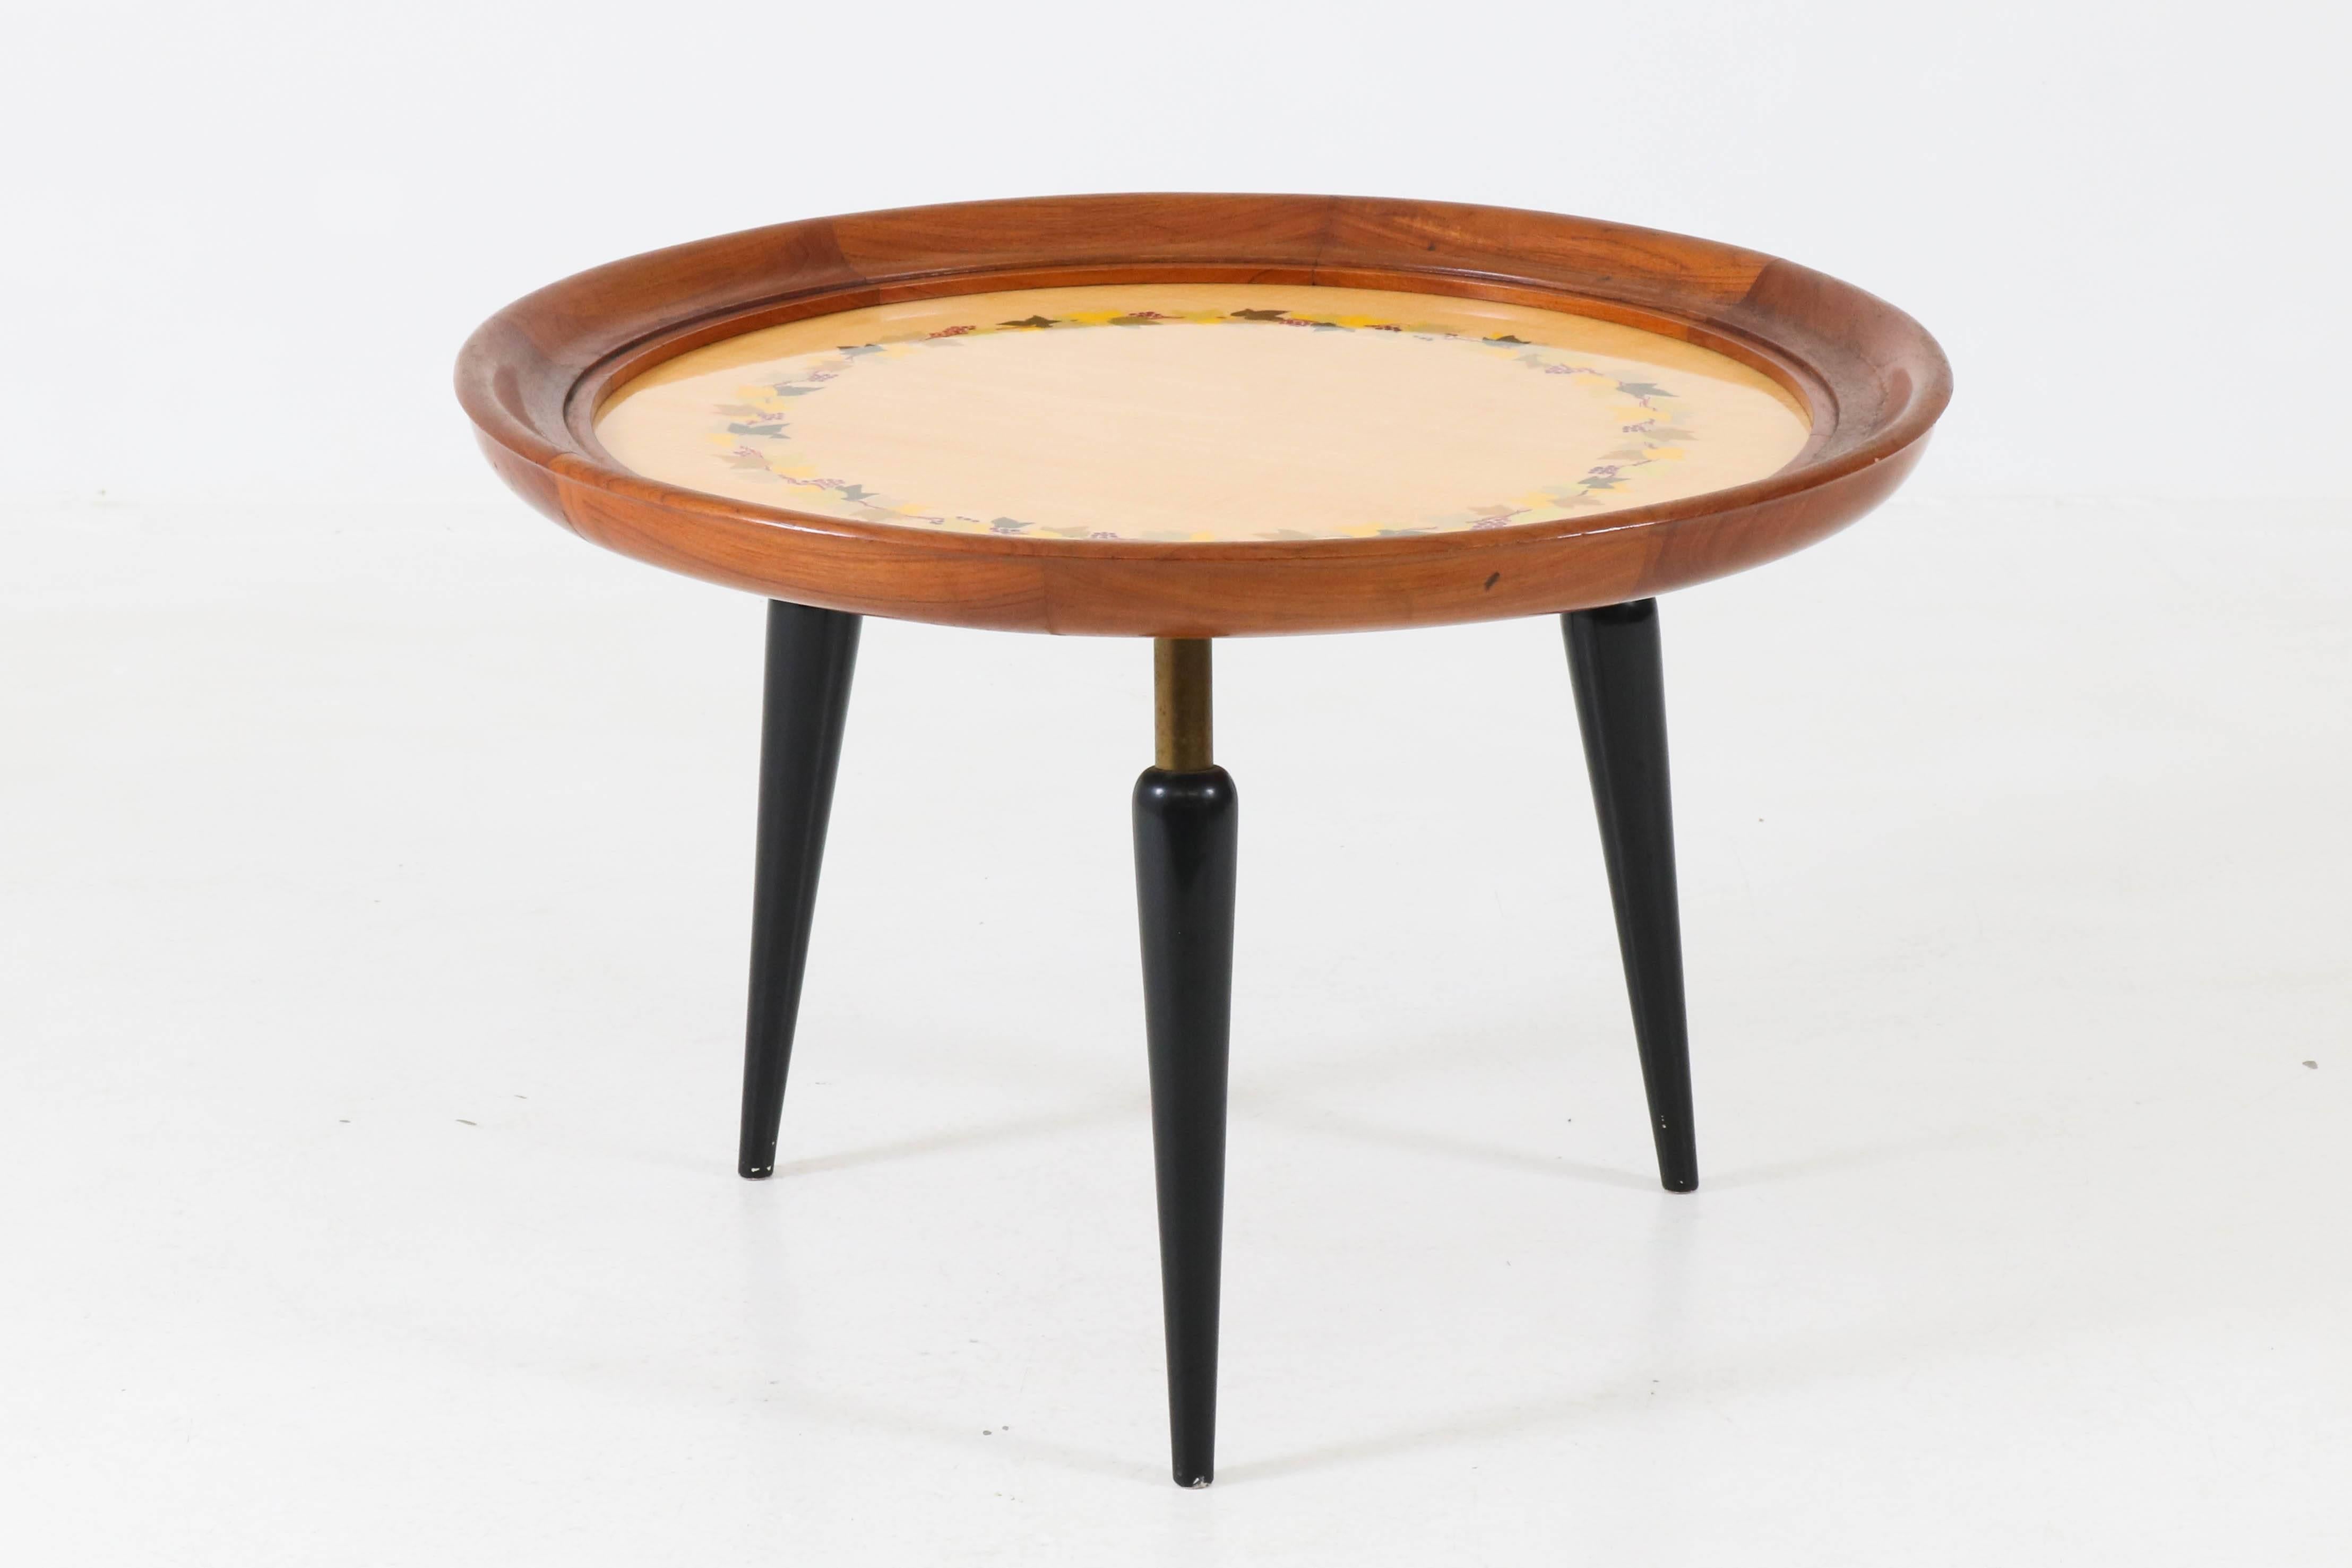 Italian Mid-Century Modern Fruitwood Coffee Table with Inlay, 1950s For Sale 4